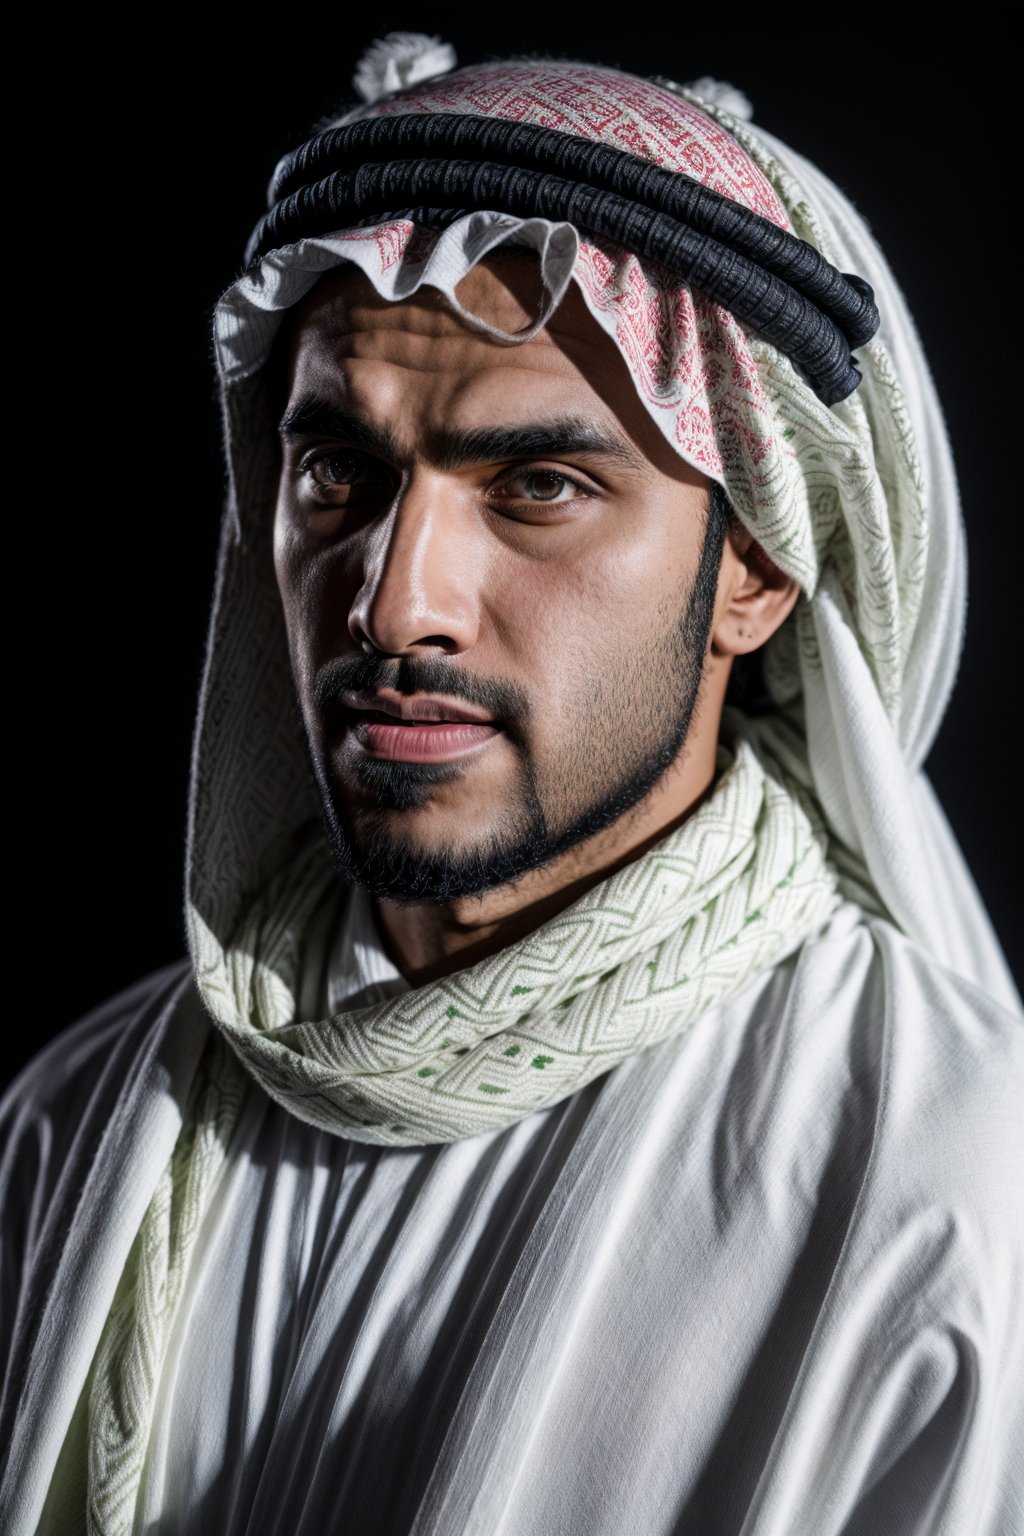  Muslim guy, with a white saudi cloth, saudi Shemagh on the head, standing, in dubai, complementary color grading, commercial photography, commercial lighting, photography, realistic